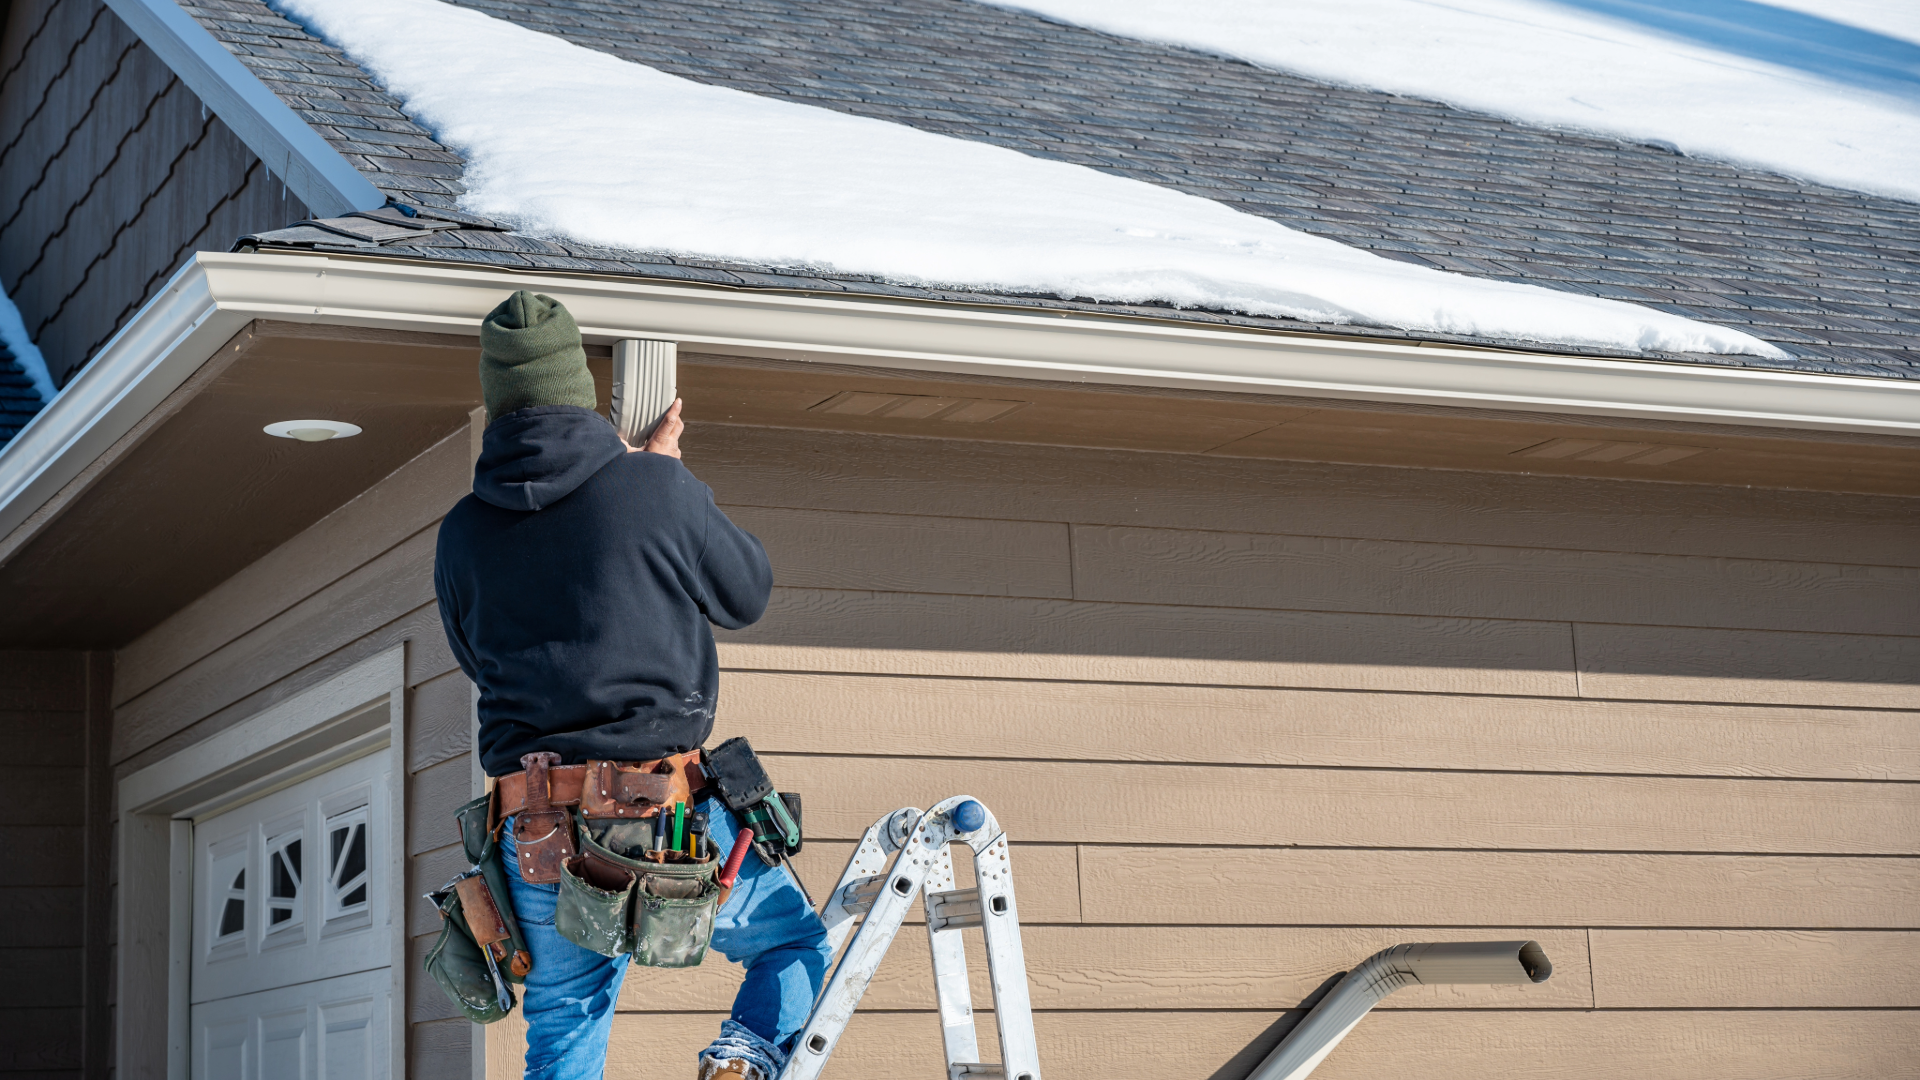 A roofing contractor repairs a problem with a gutter on a roof. Roofing projects require local dumpster rentals during all seasons of the year.